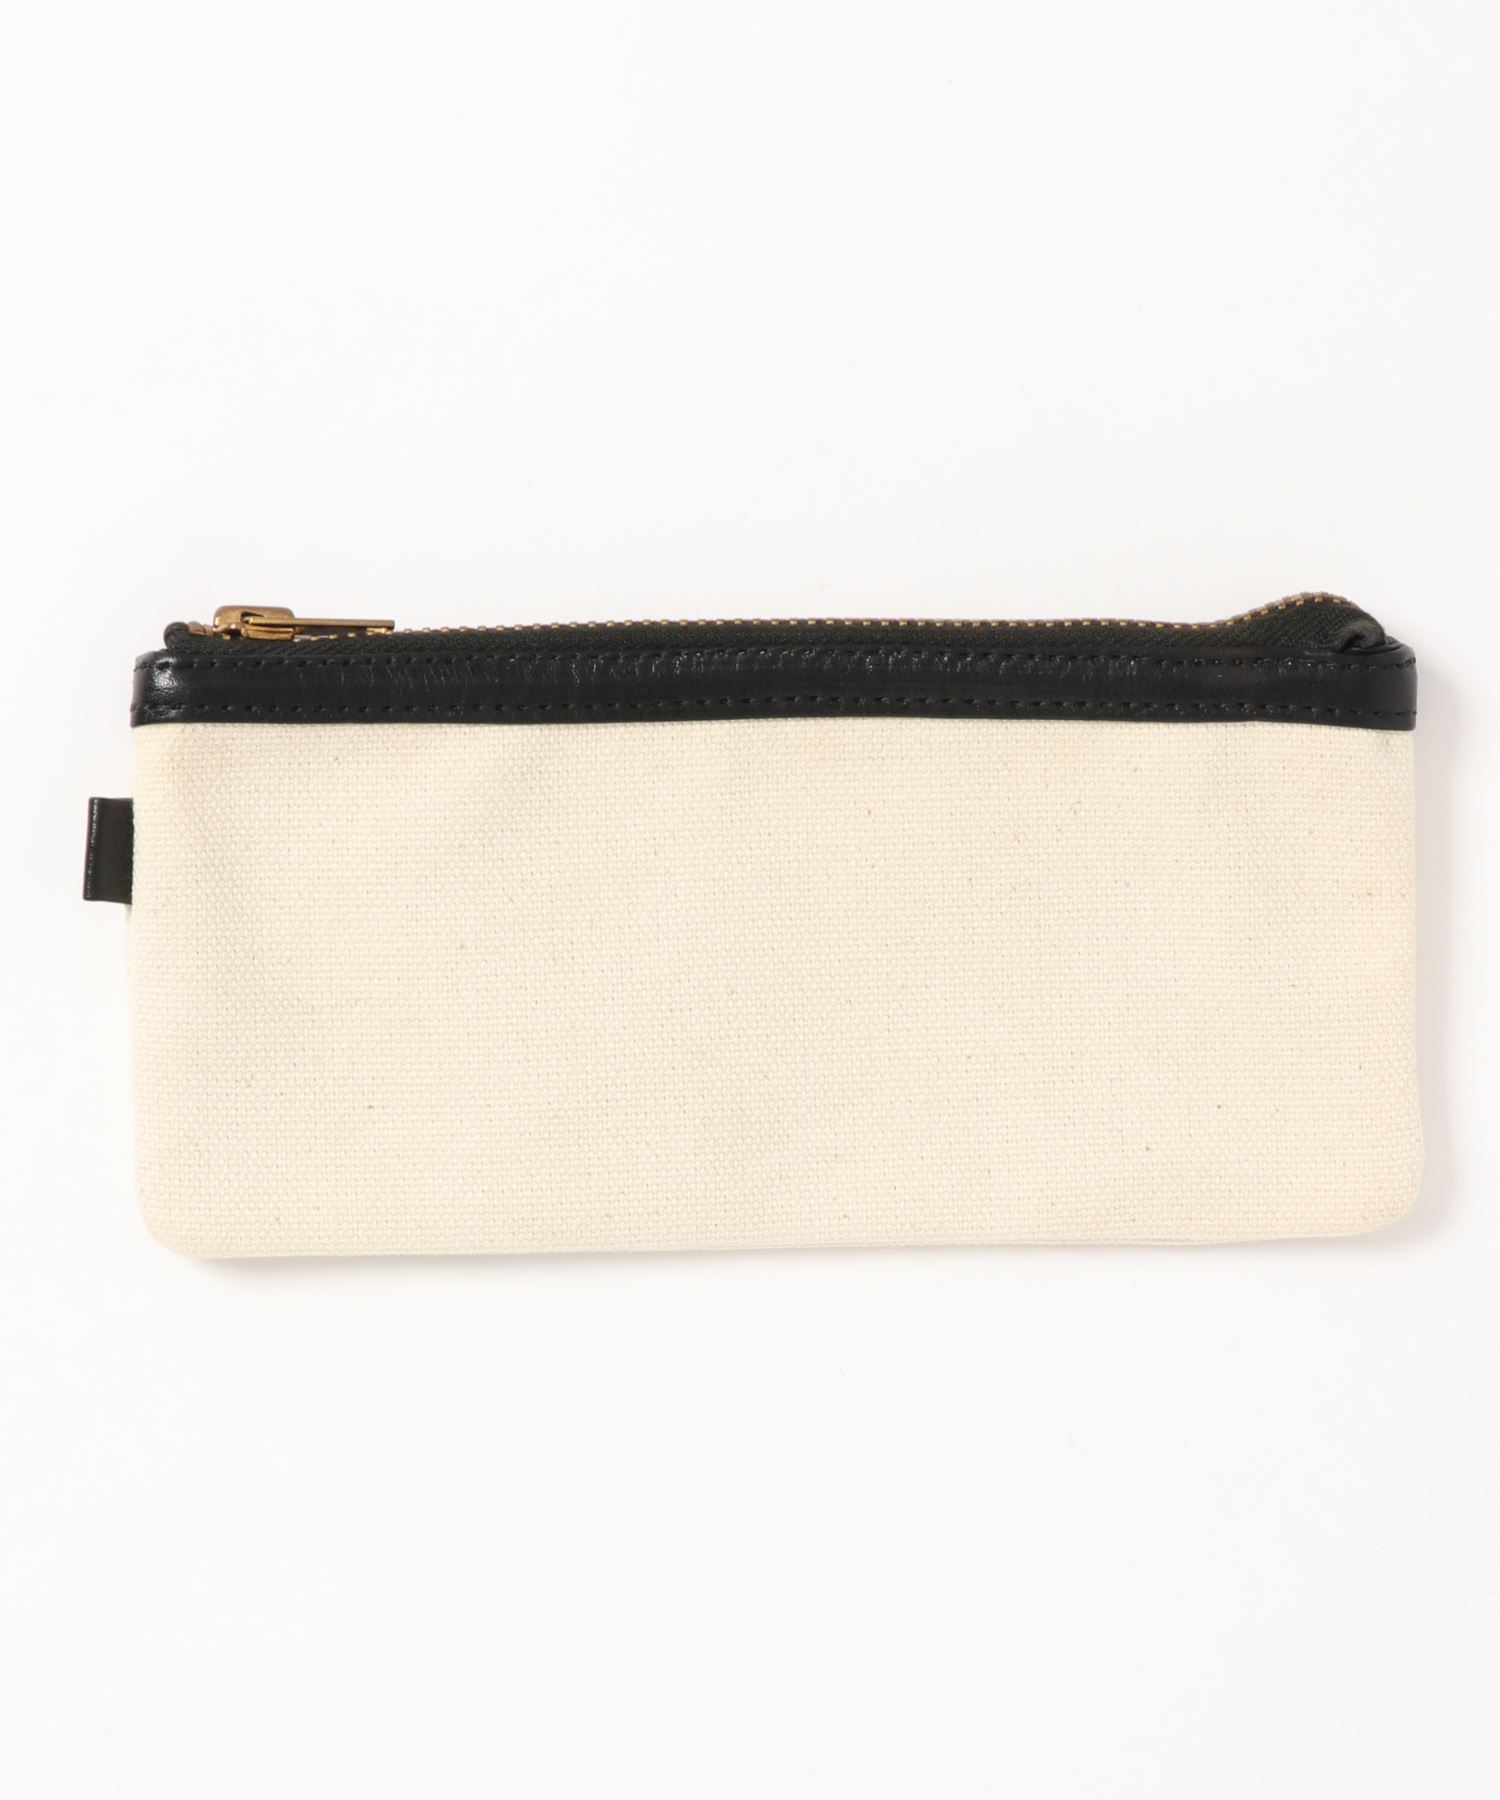 ARCHIVER W メーカー再生品 STORAGE OF LEATHERCANVAS 【予約】 POUCH VALUES